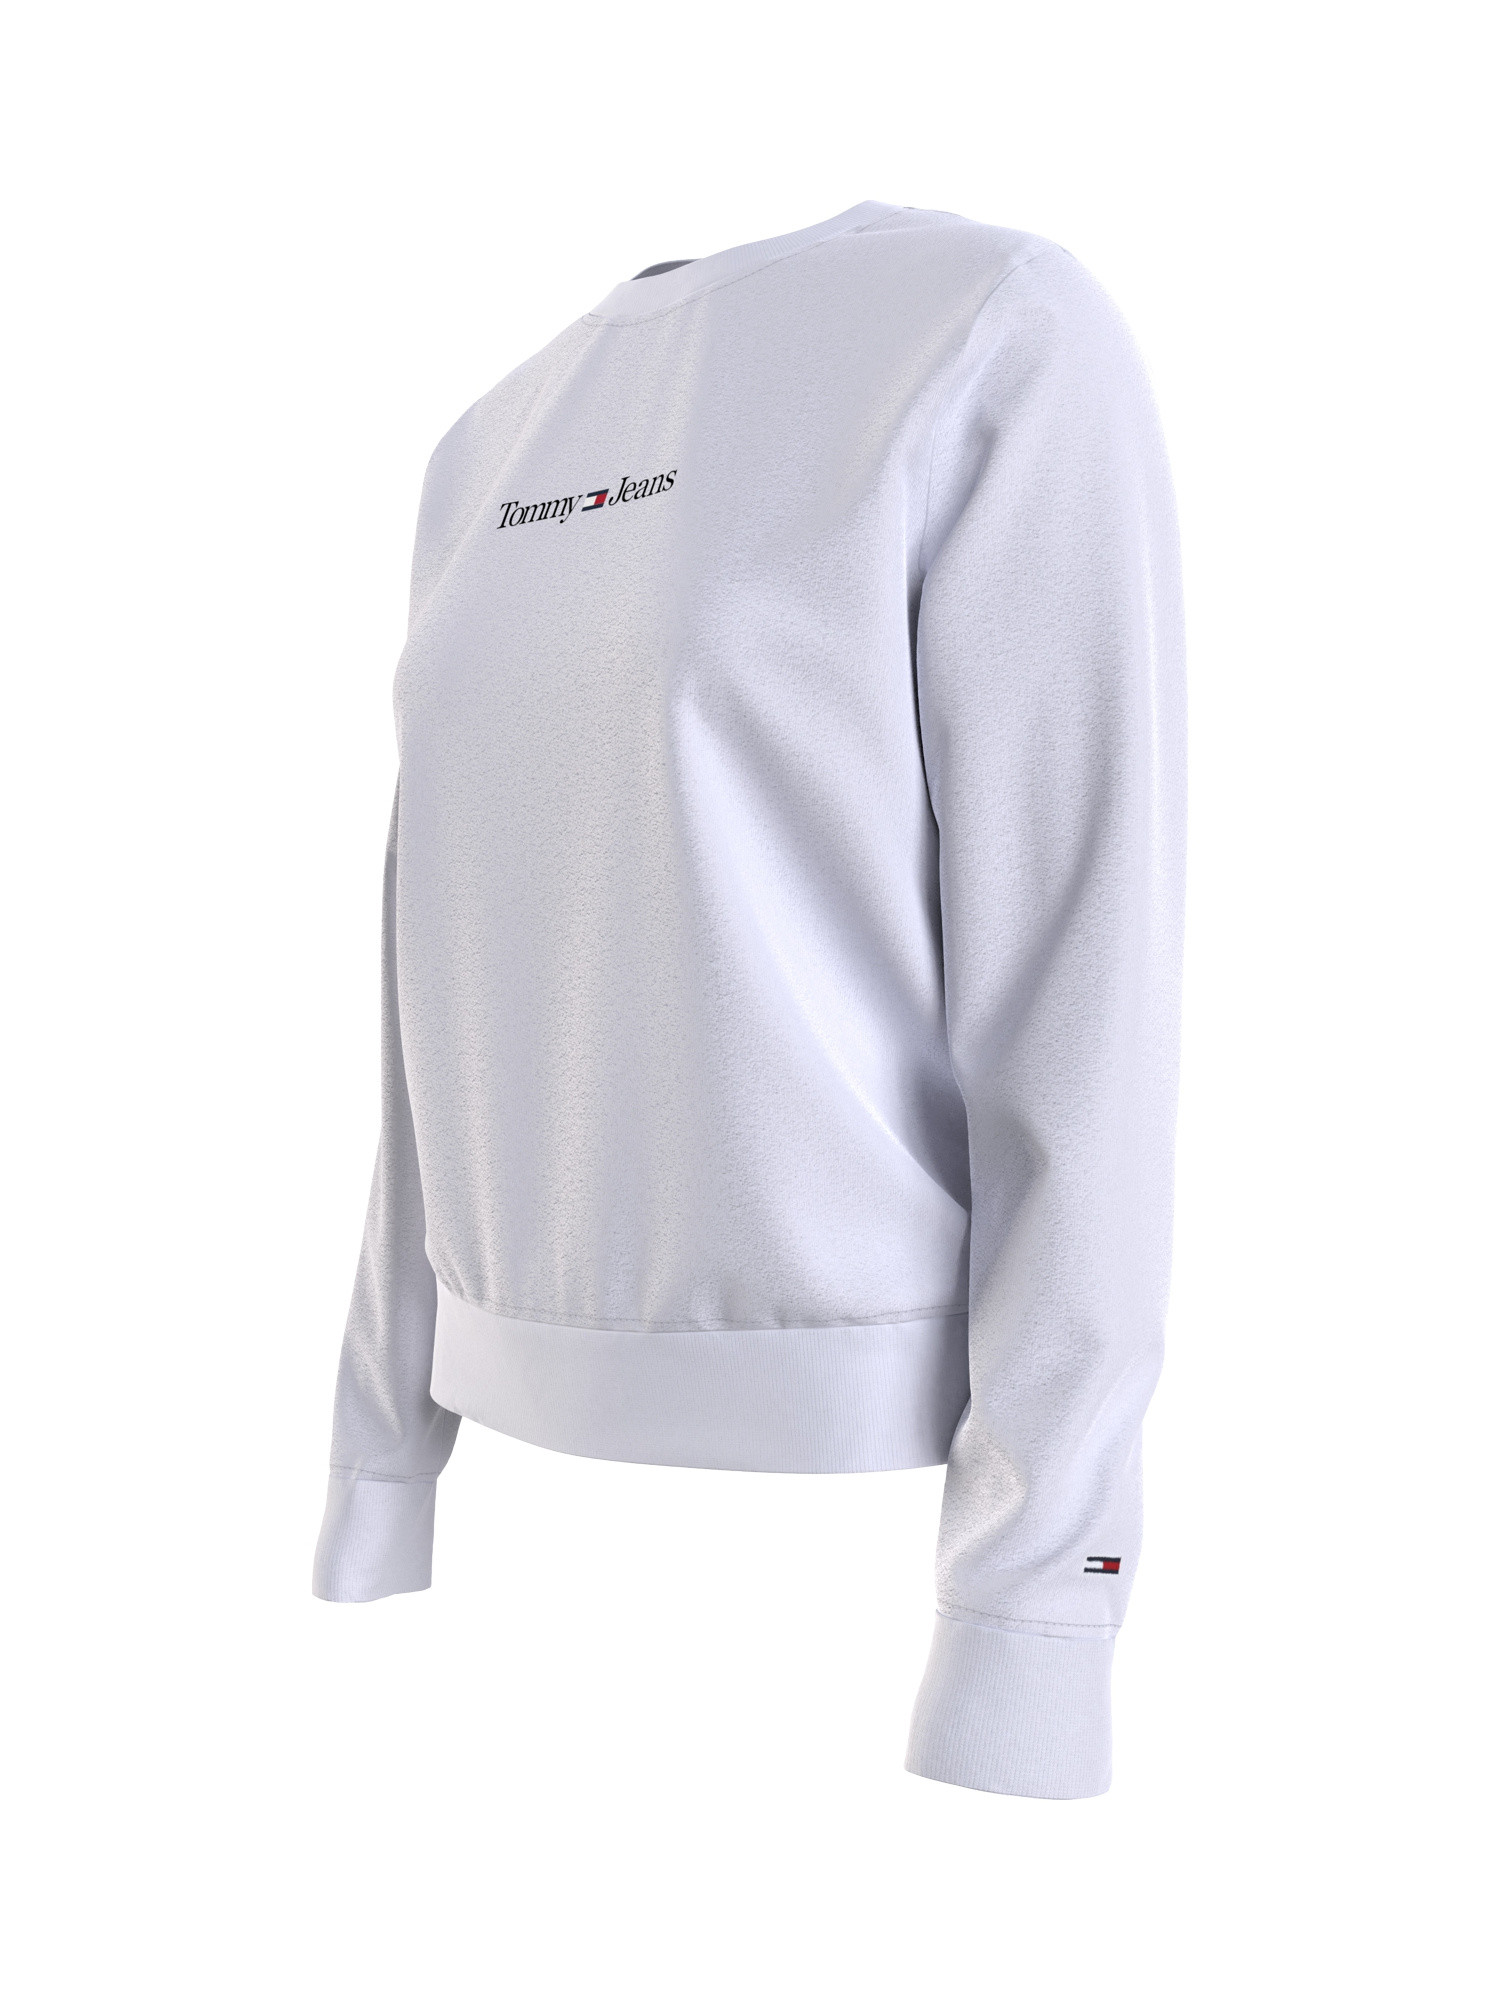 Tommy Jeans - Cotton crewneck sweatshirt with logo, White, large image number 2